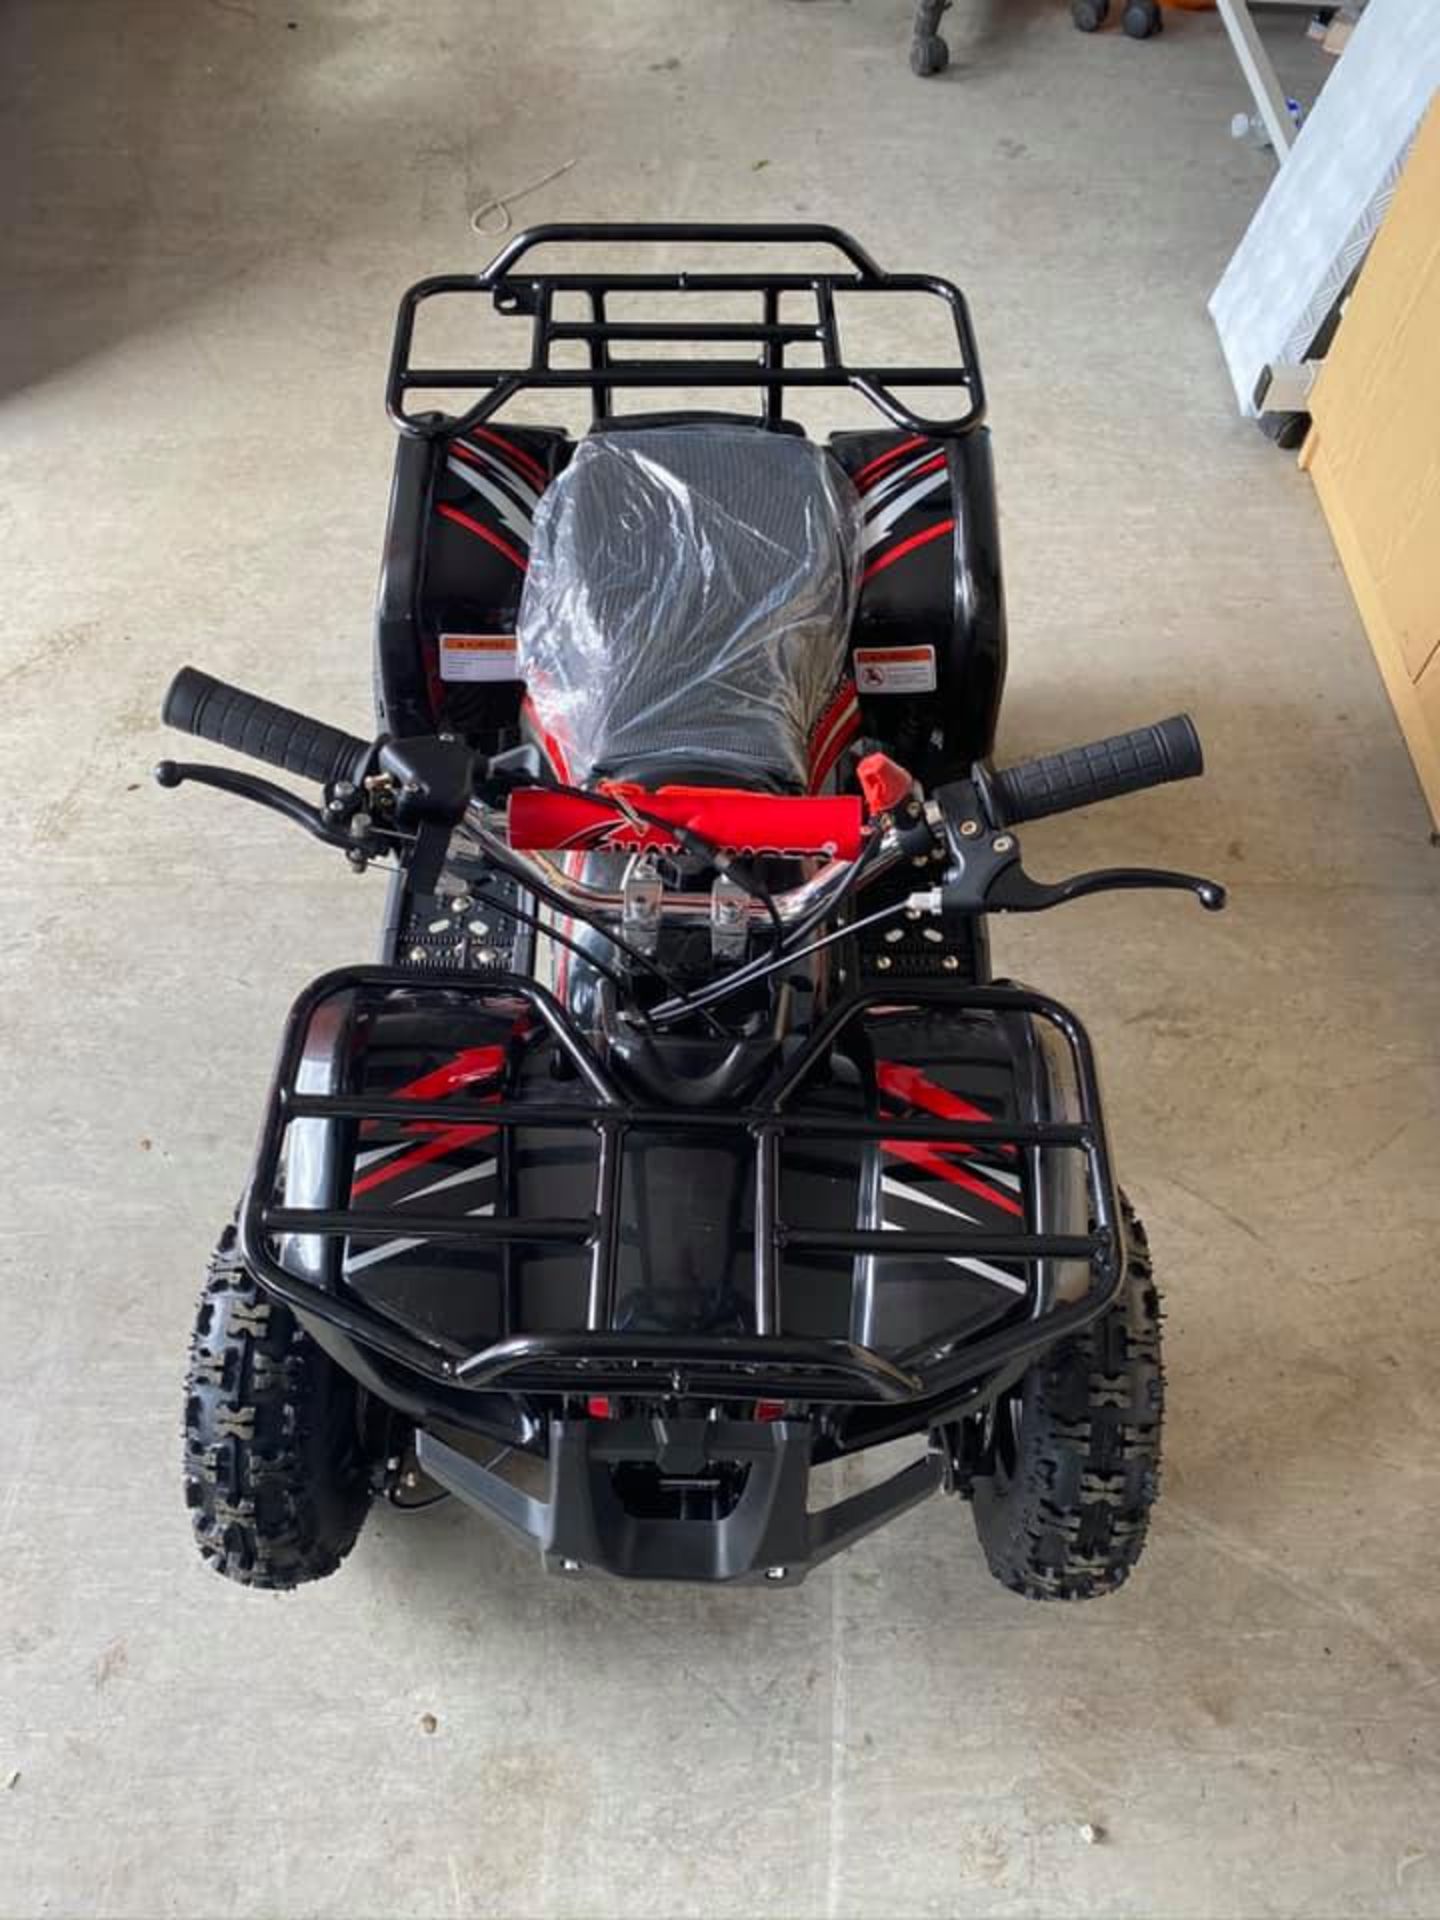 2019 Brand New 50cc Mini QuadBrand New 50cc Mini Quad - Image 2 of 5